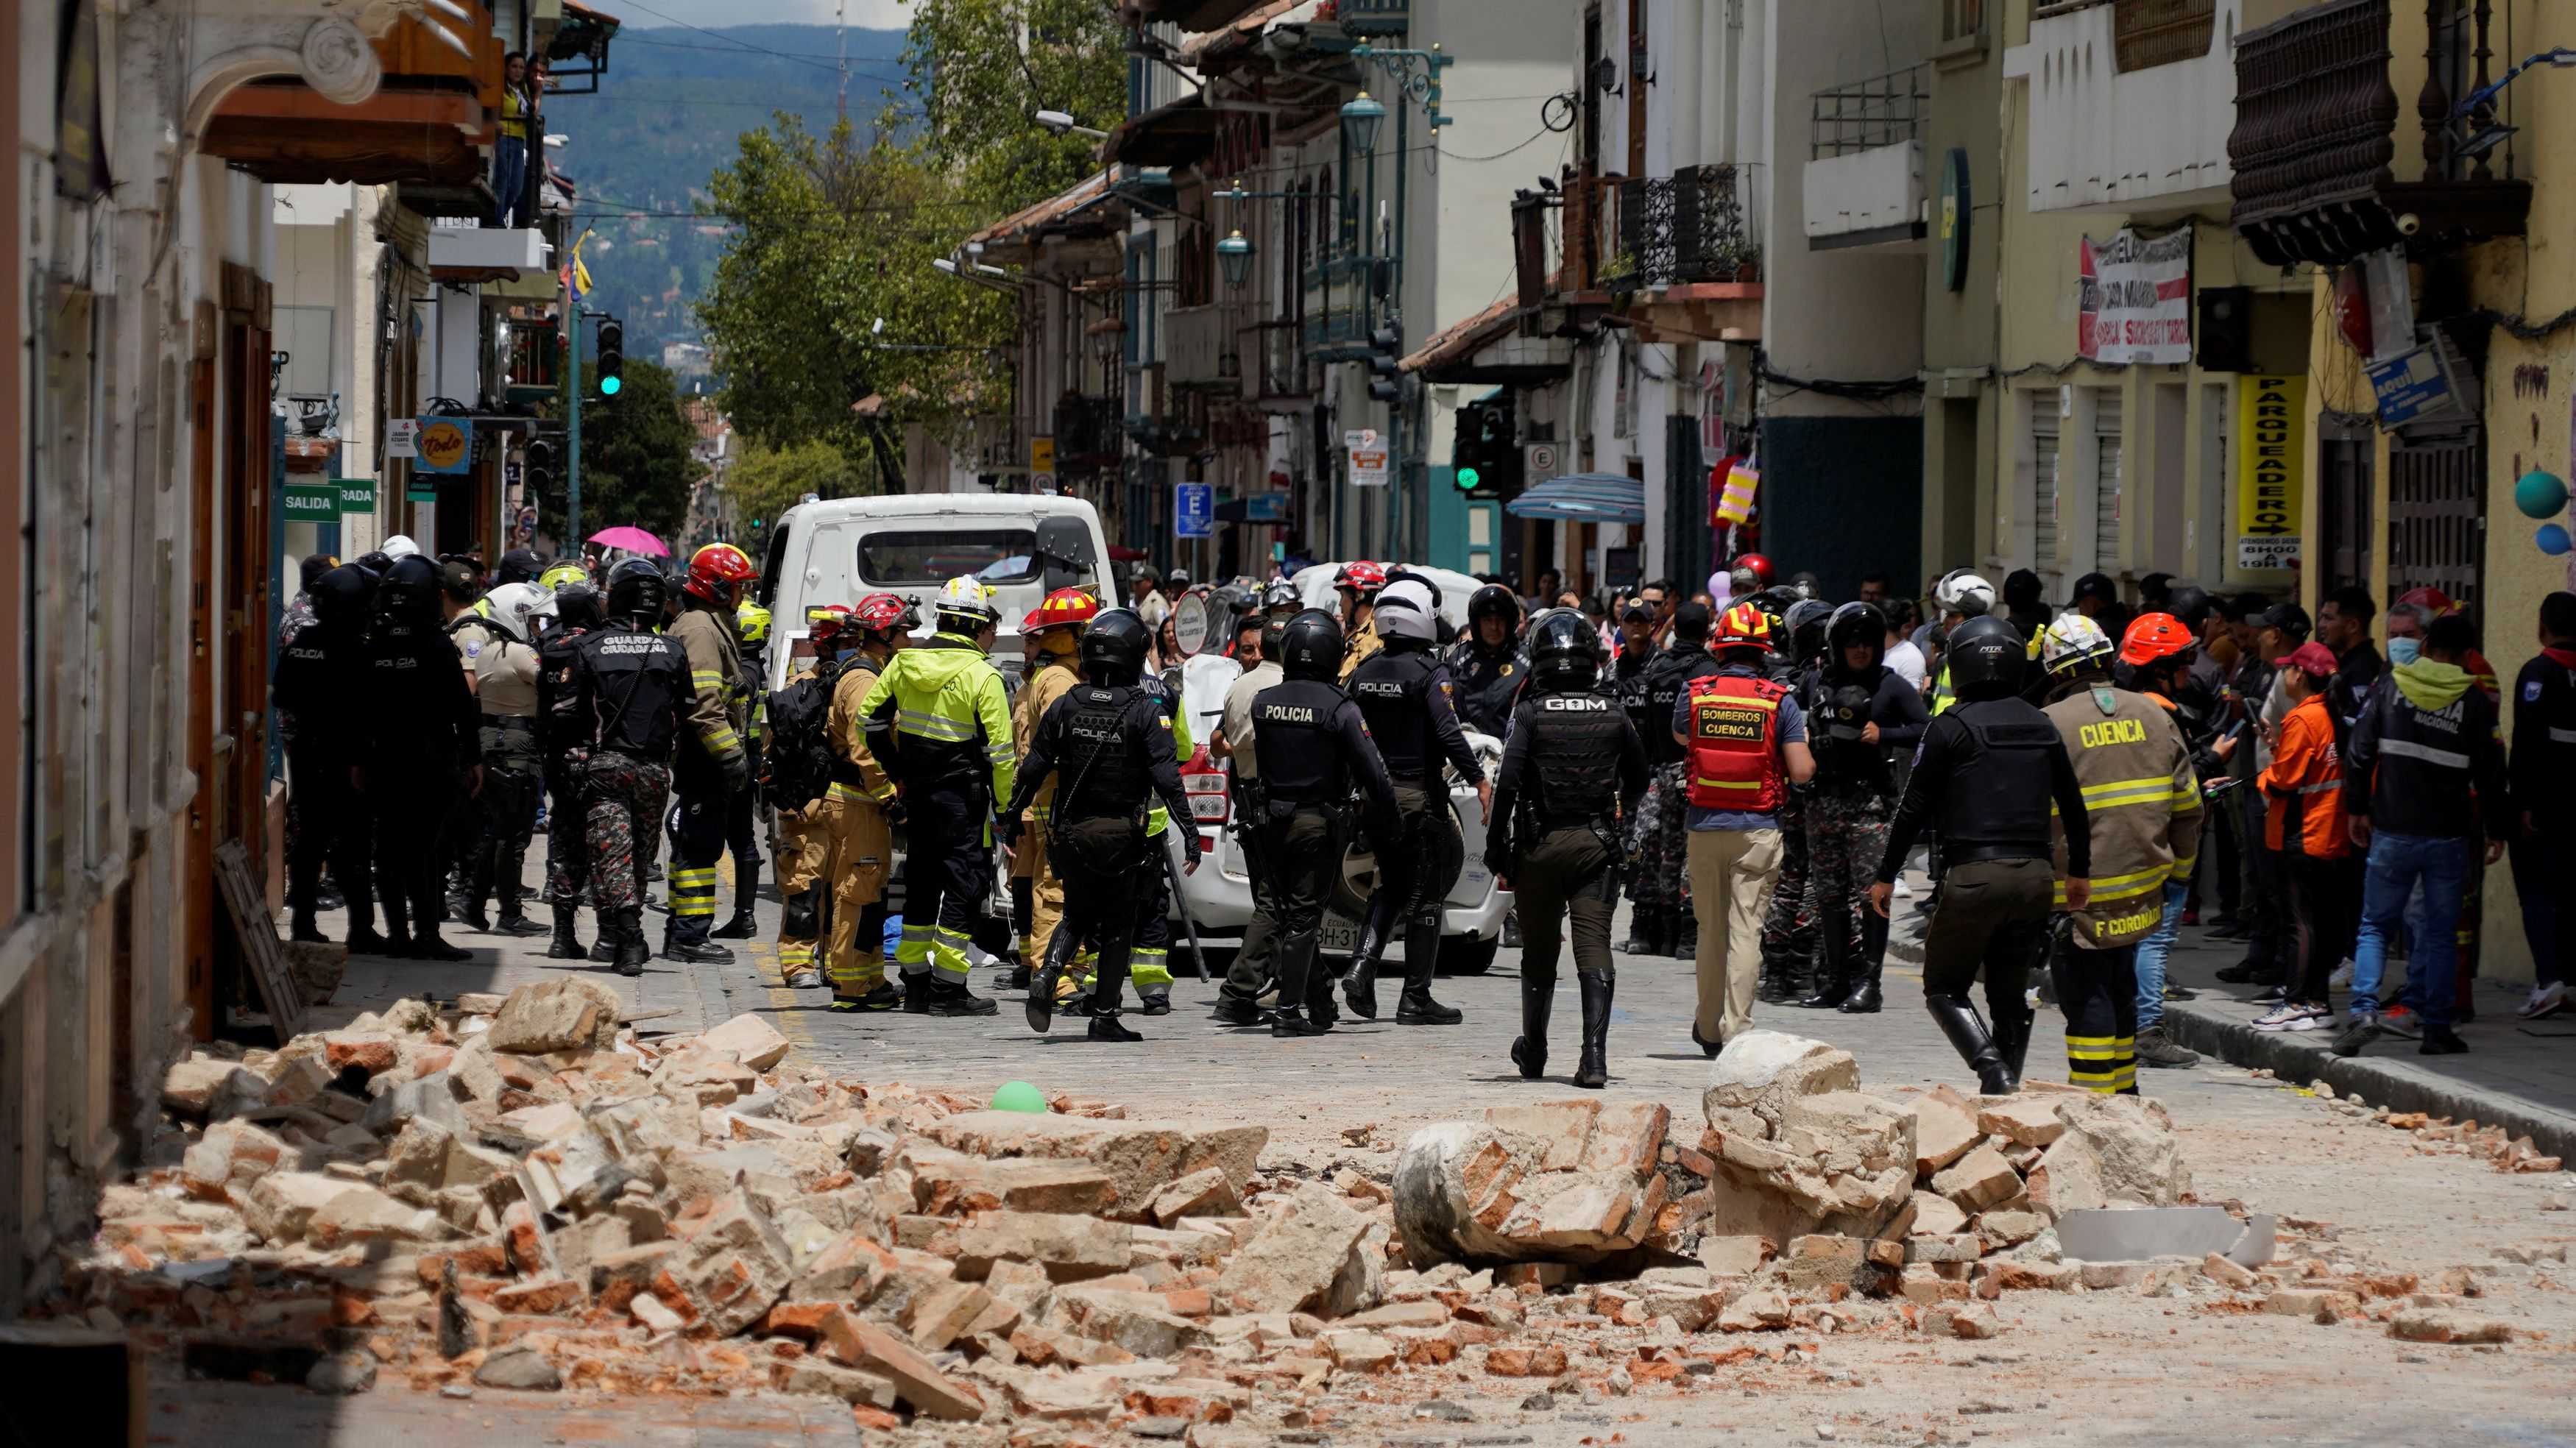 Rubble from a house affected by an earthquake are pictured in Cuenca, Ecuador, March 18, 2023. /Reuters